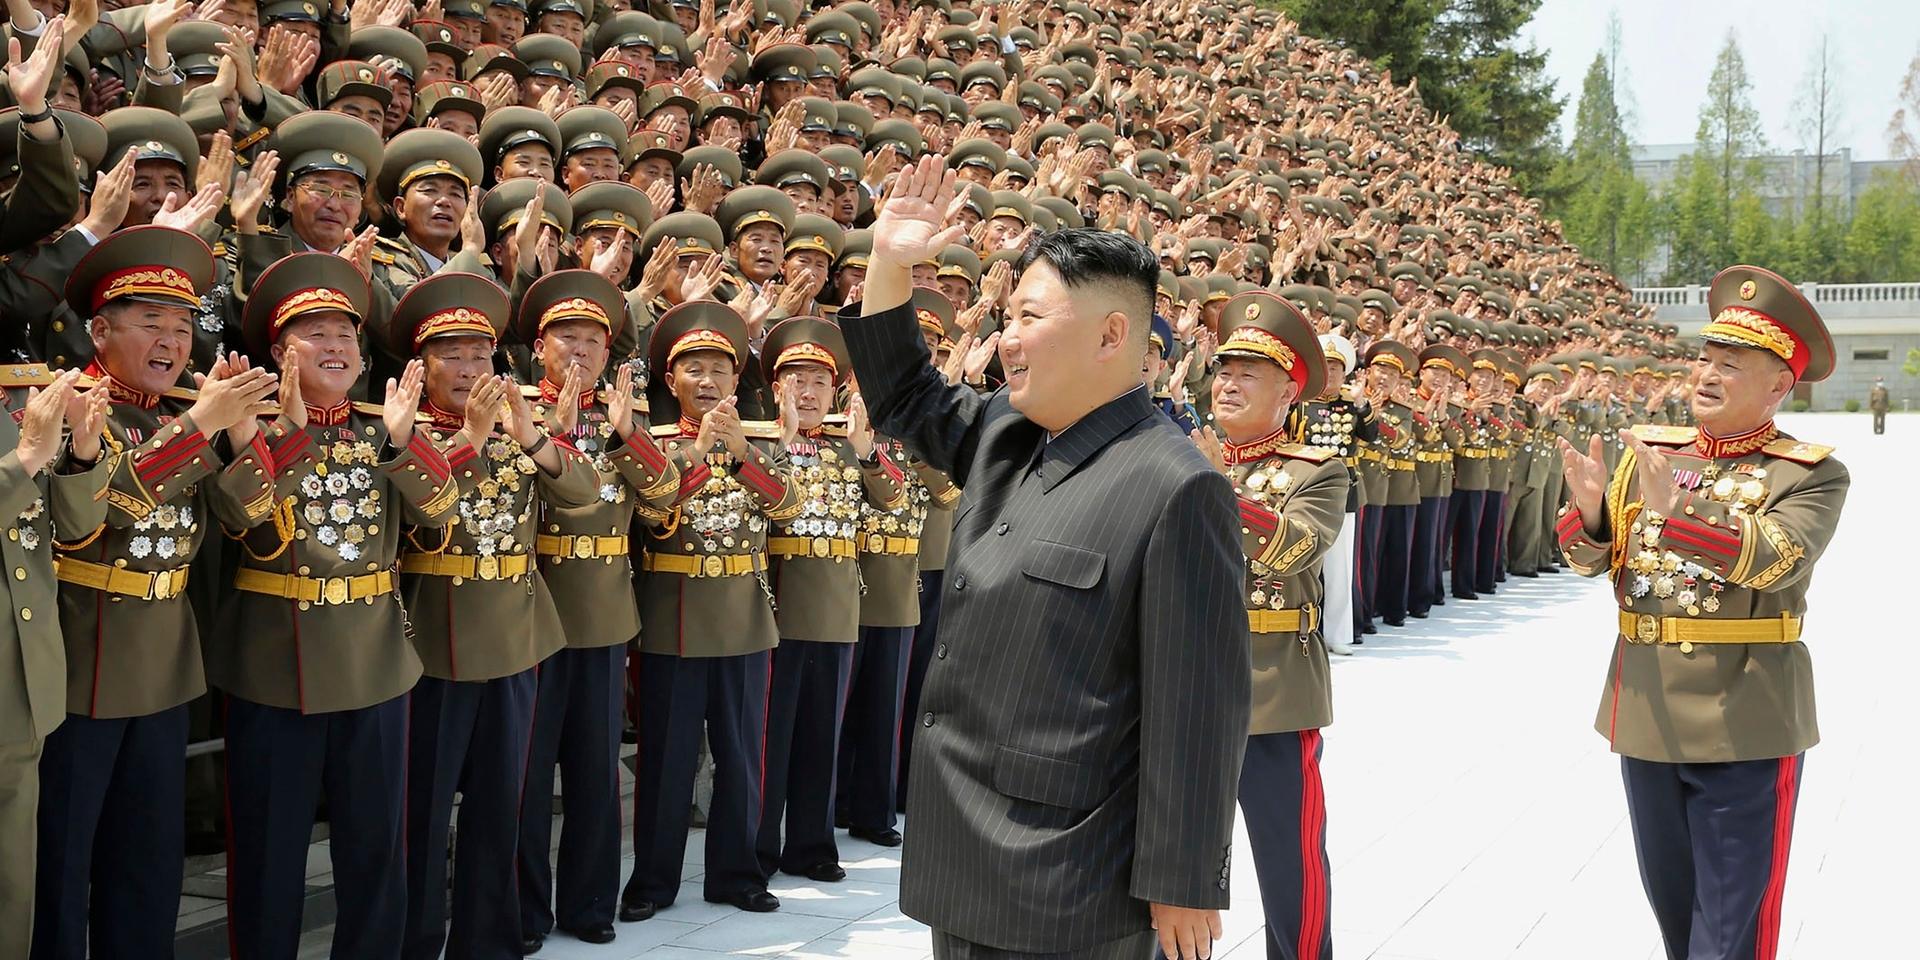 In this photo provided by the North Korean government, North Korean leader Kim Jong Un waves to participants in a workshop of the commanders and political officers of the Korean People's Army, in Pyongyang, North Korea, on July 27, 2021.